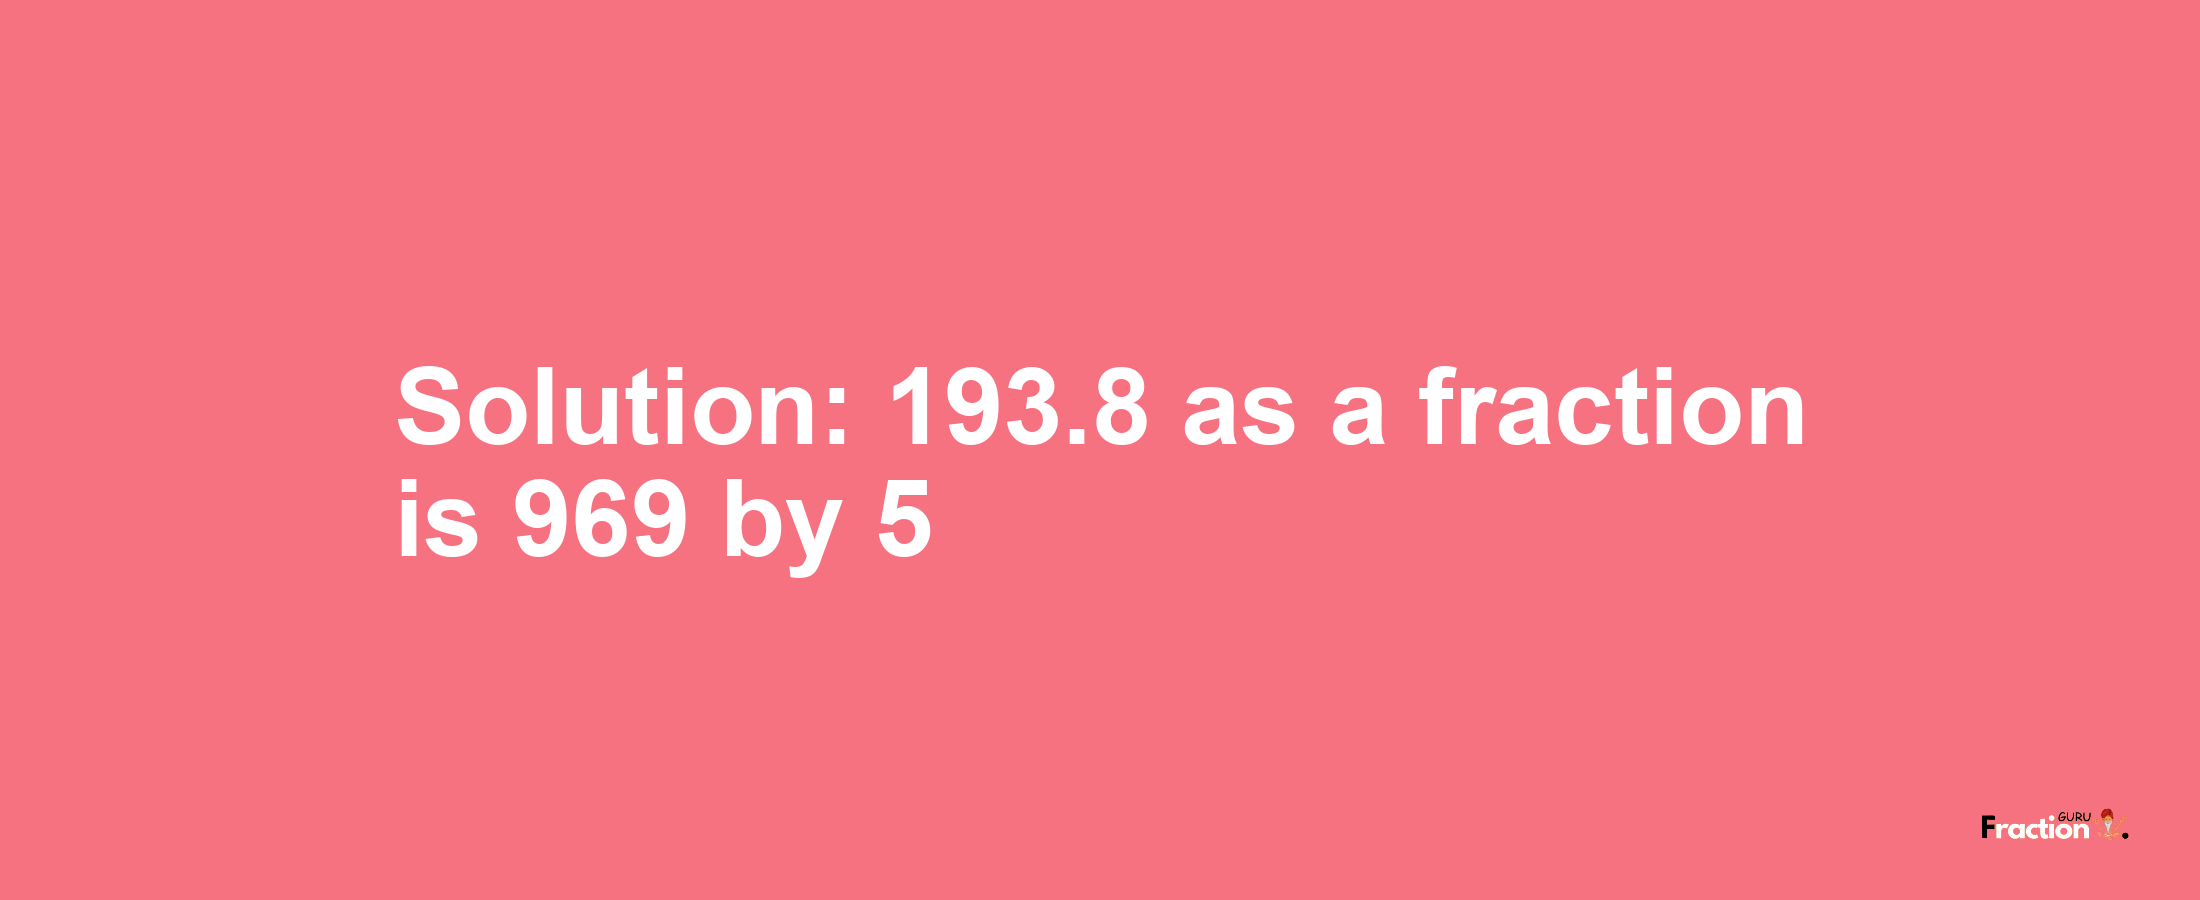 Solution:193.8 as a fraction is 969/5